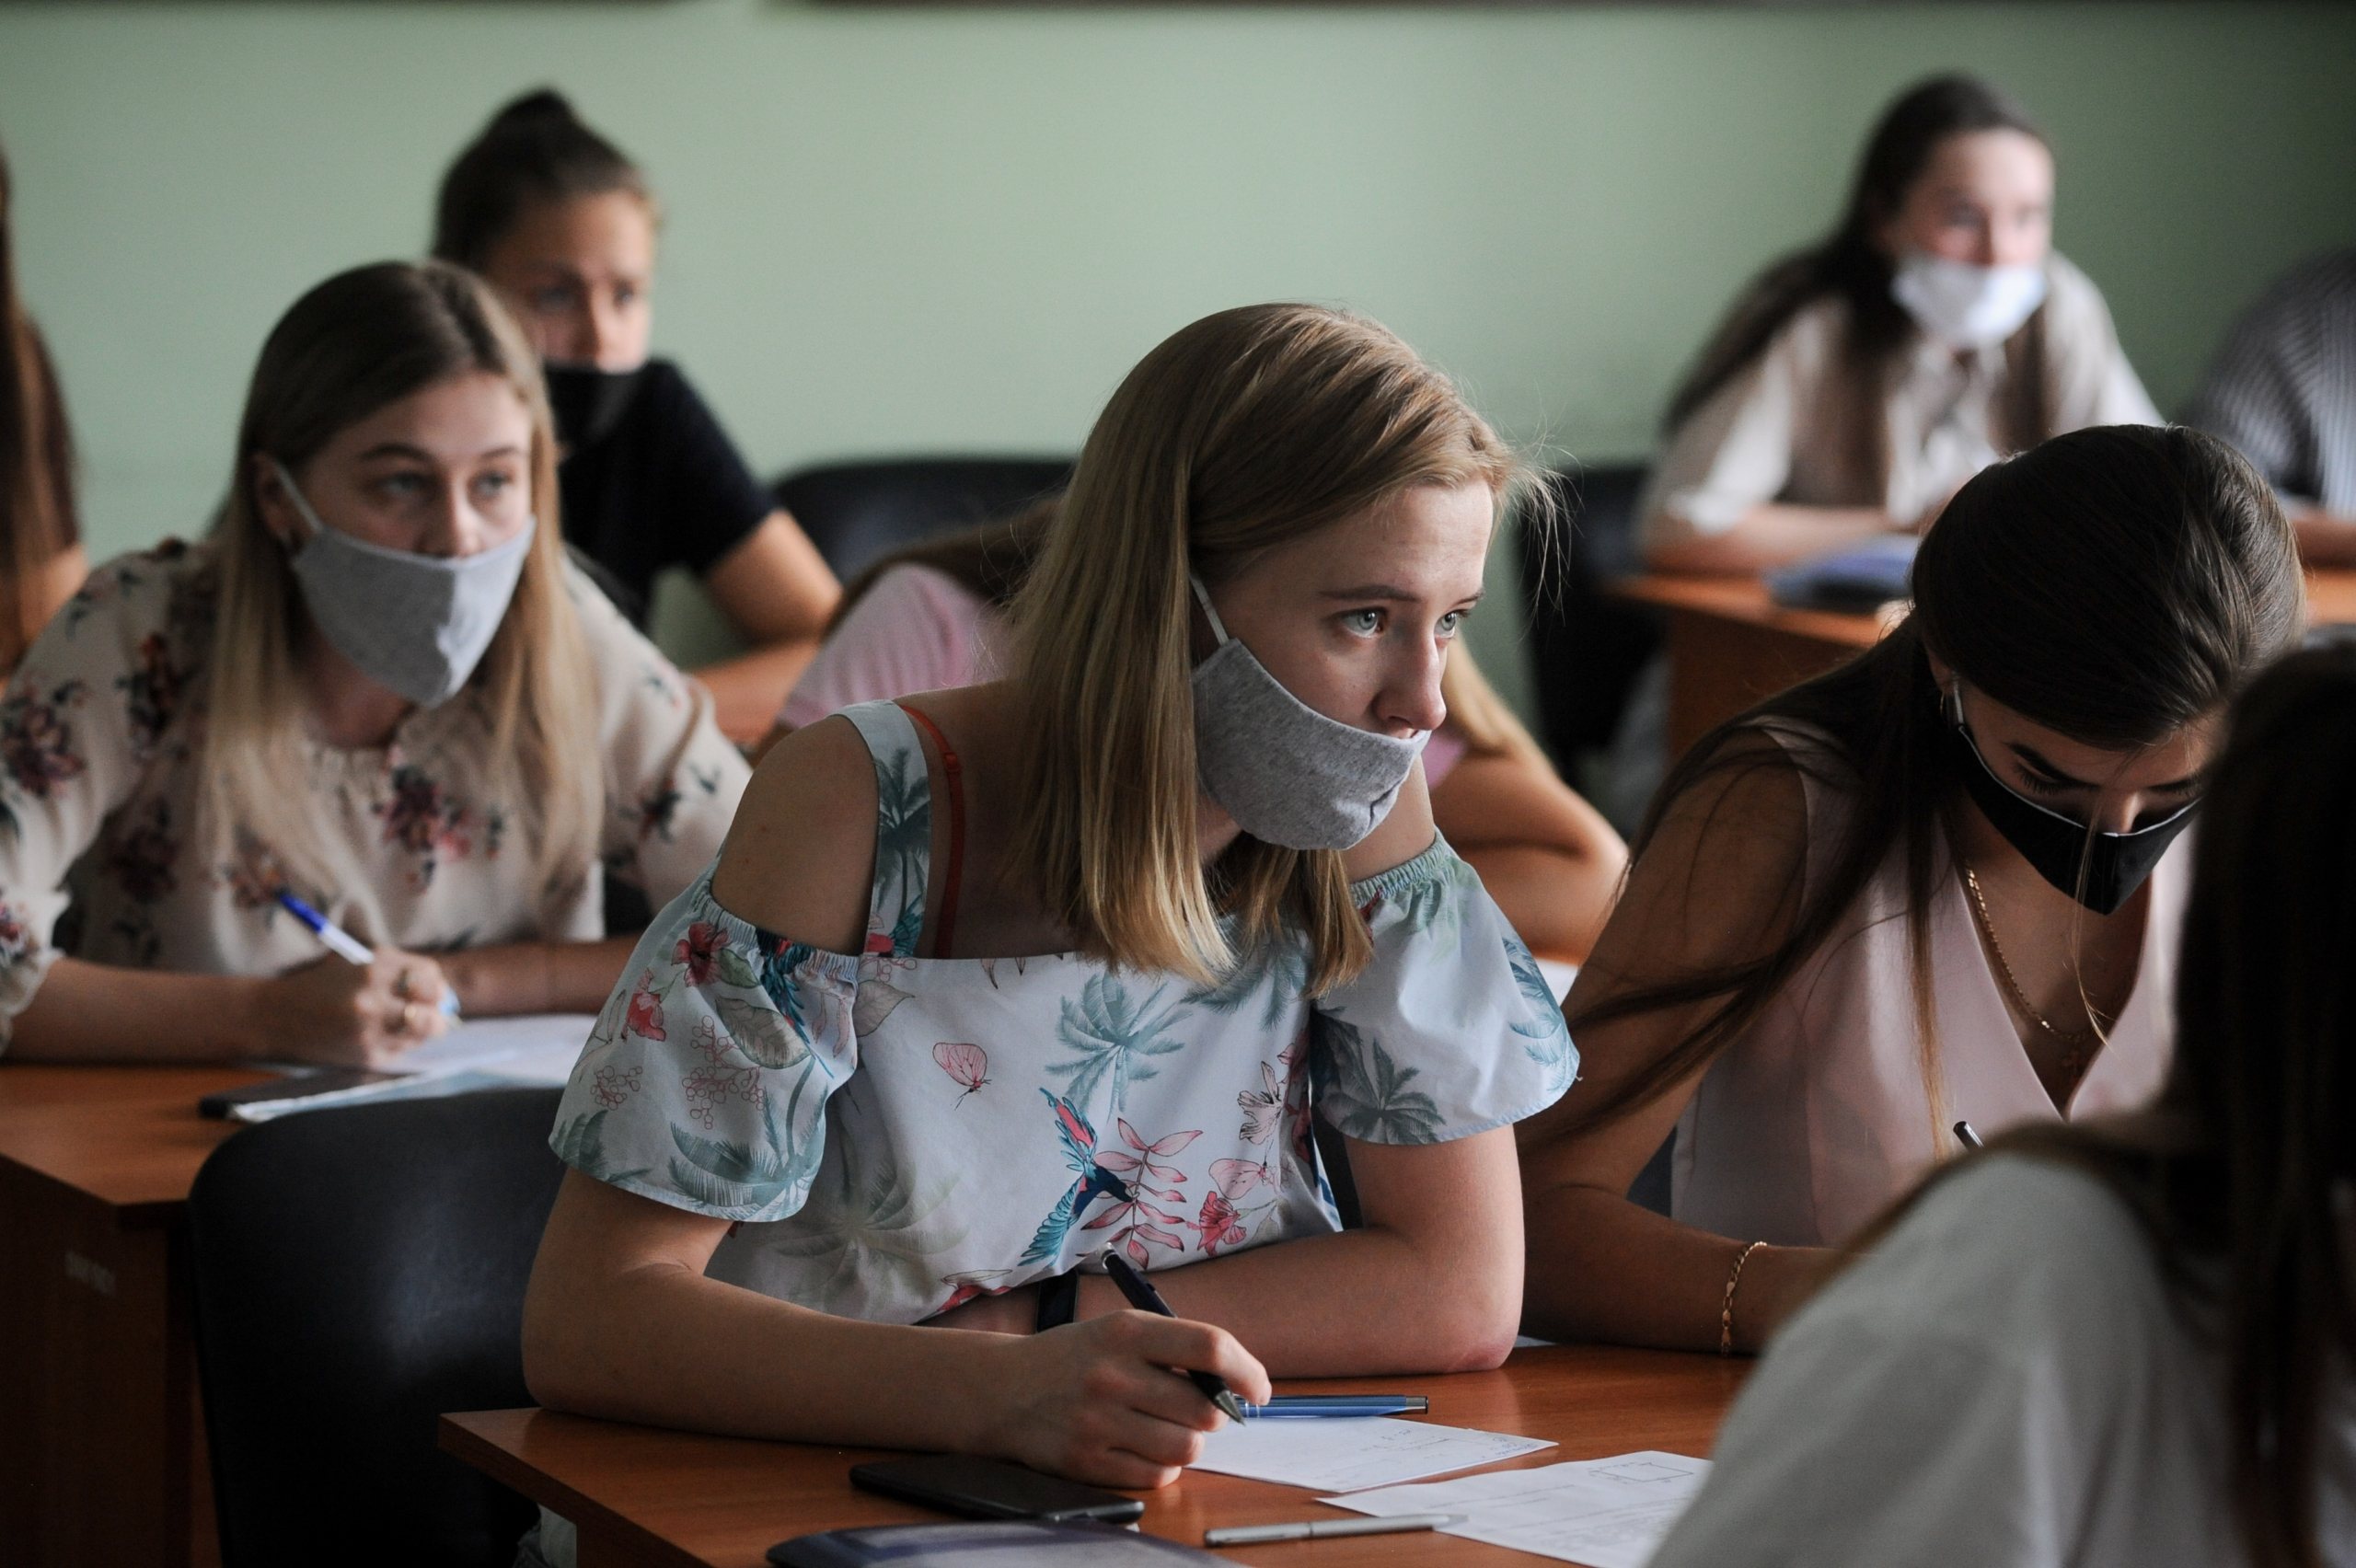 Female students of Tambov University are seen wearing